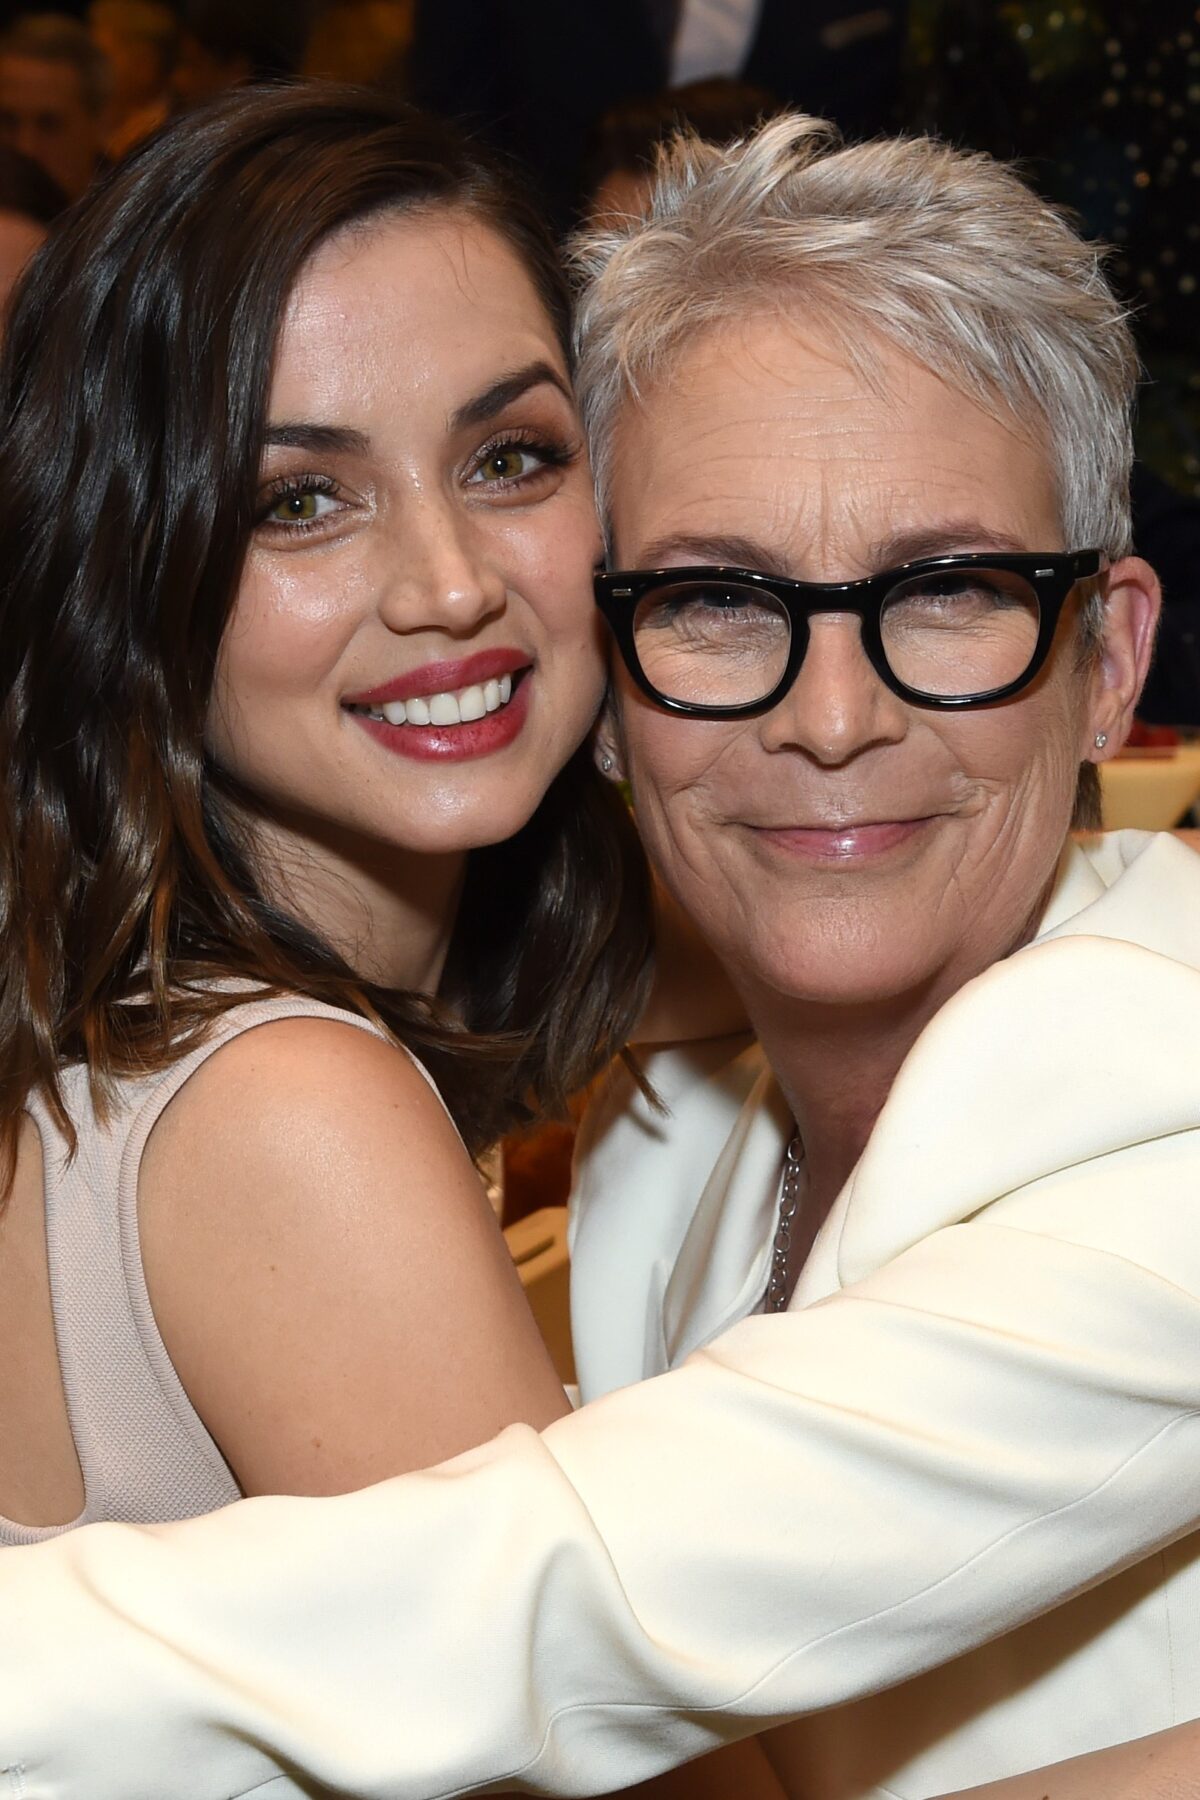 LOS ANGELES, CALIFORNIA - JANUARY 03: Ana de Armas (L) and Jamie Lee Curtis attend the 20th Annual AFI Awards at Four Seasons Hotel Los Angeles at Beverly Hills on January 03, 2020 in Los Angeles, California. (Photo by Michael Kovac/Getty Images for AFI)